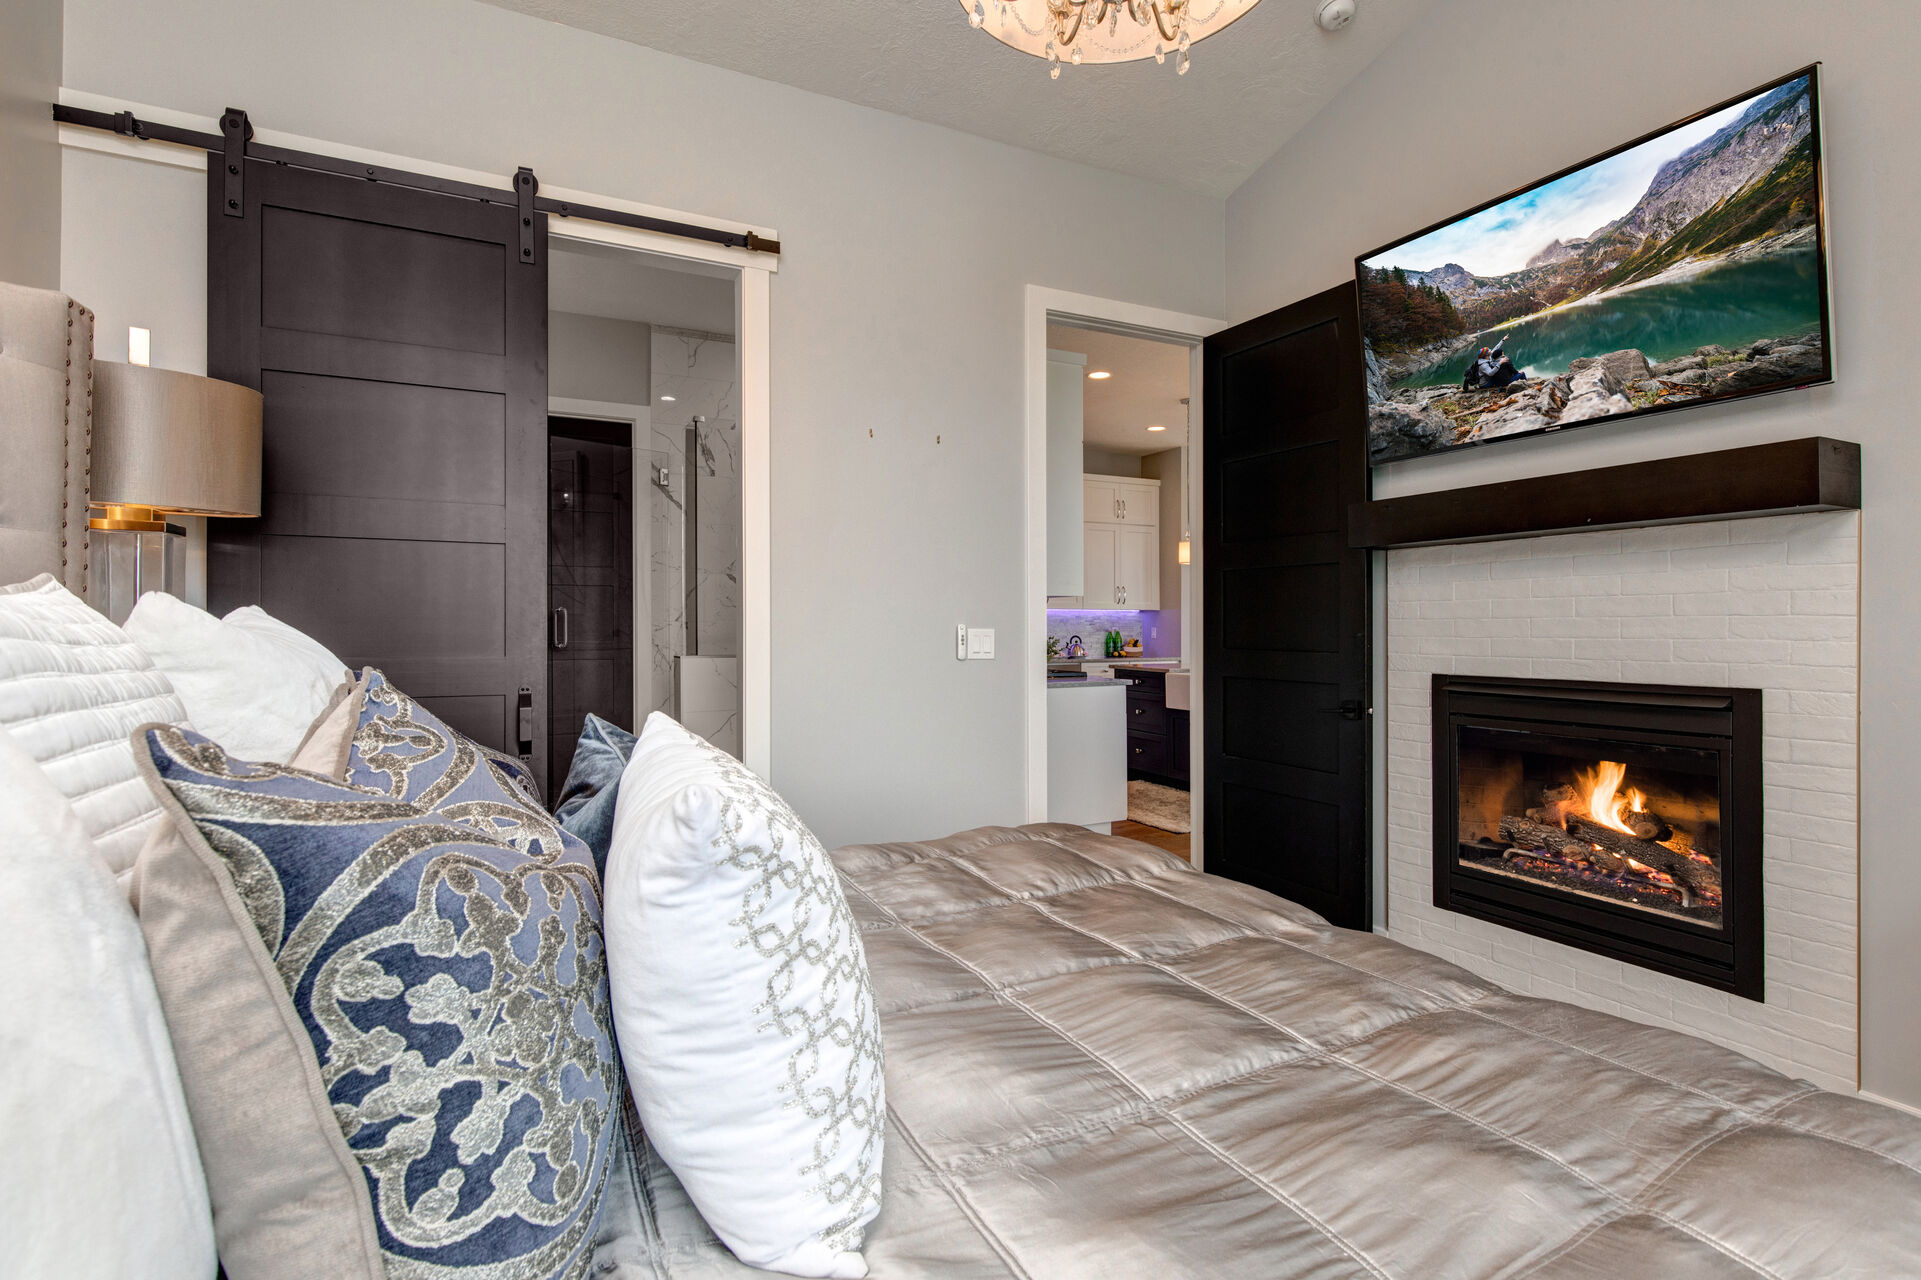 Main Level Master Bedroom with king bed, smart tv, gas fireplace, and en suite bathroom